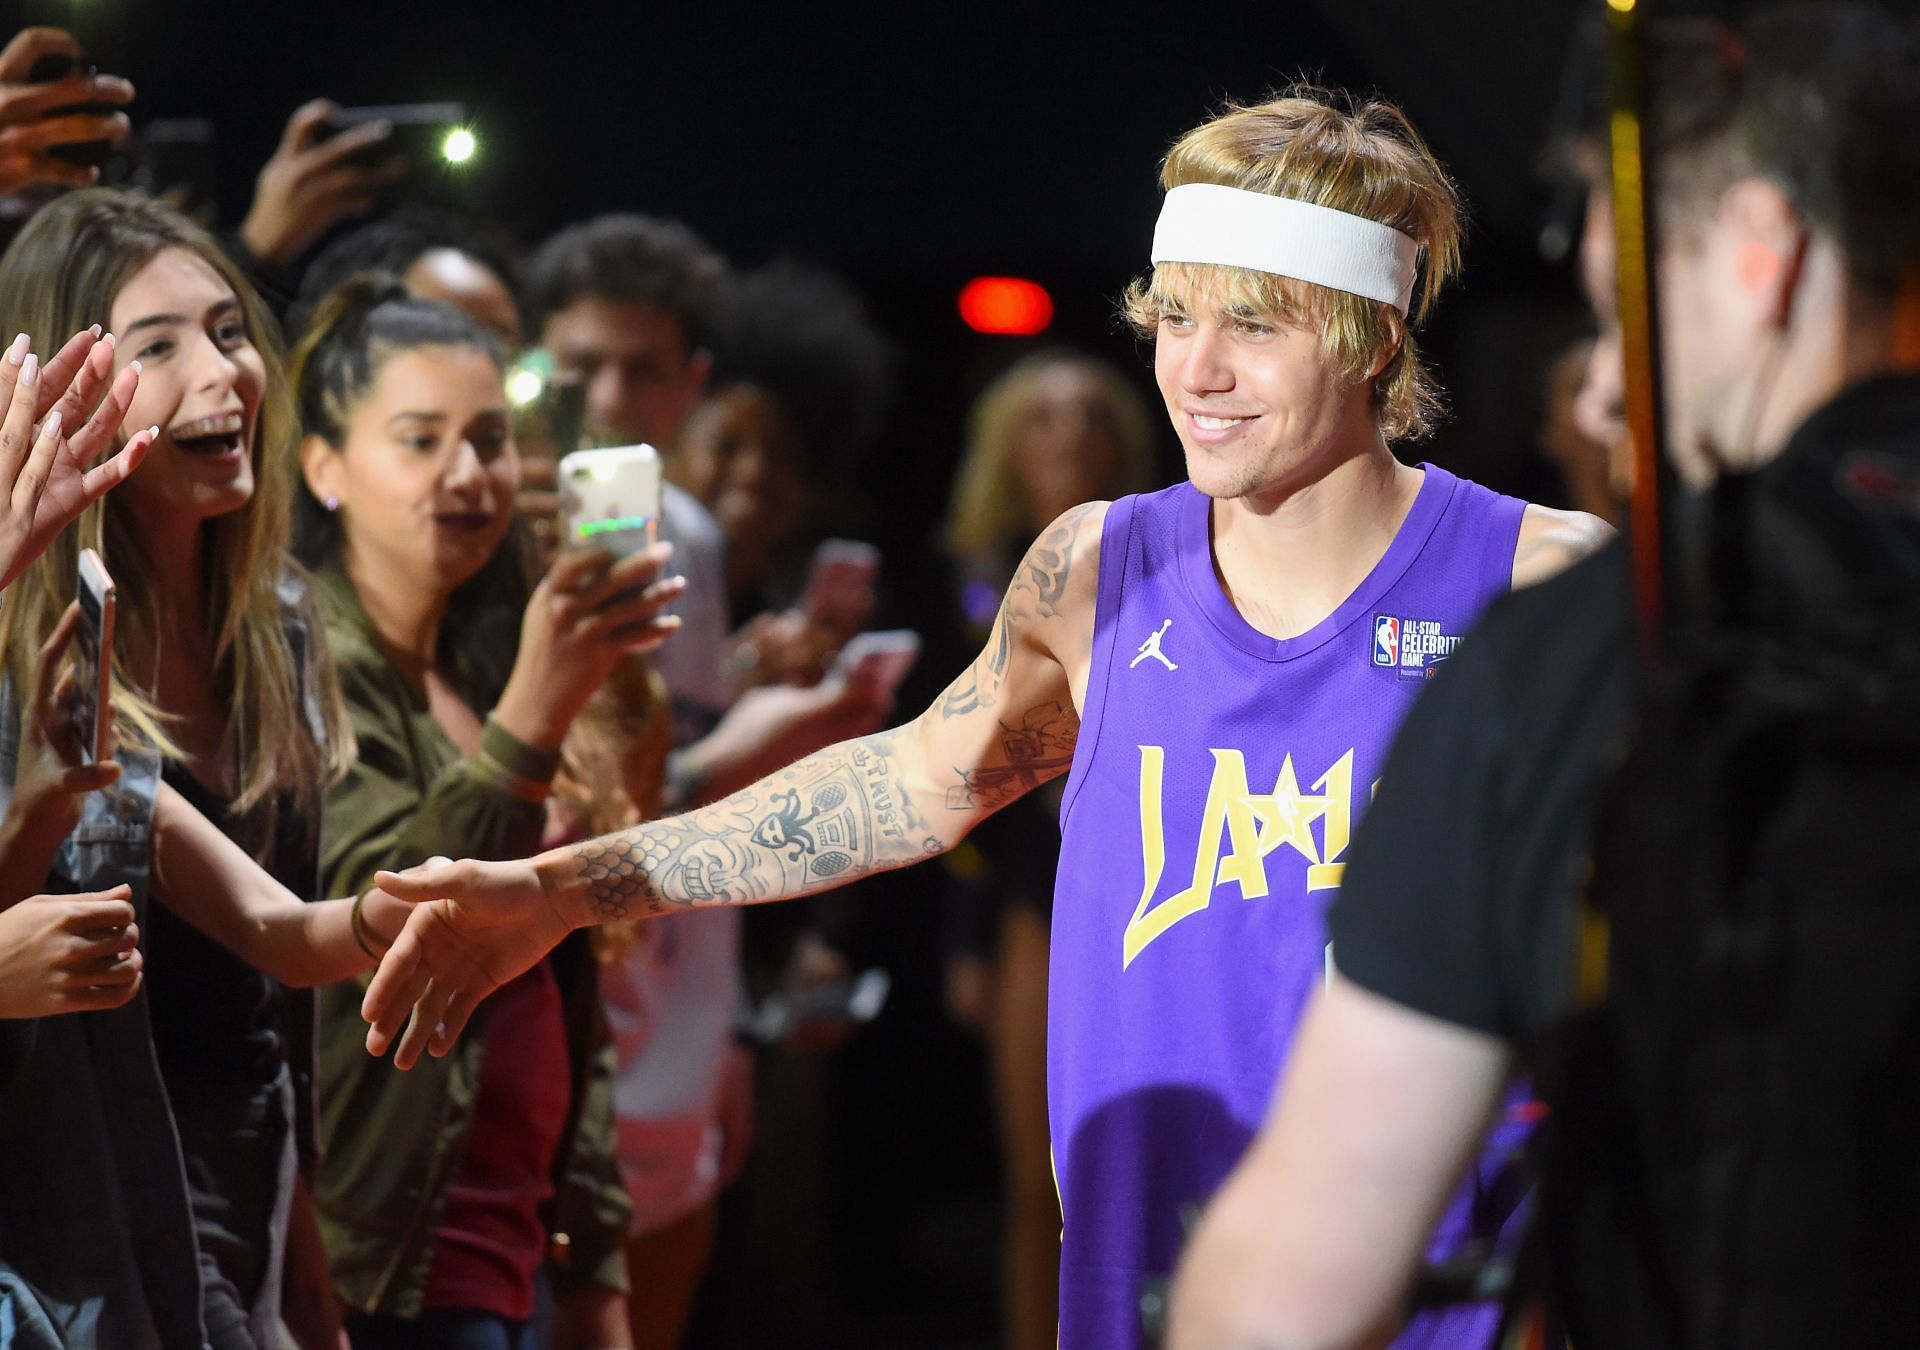 Justin Bieber went ahead with his concert in Saudi Arabia despite calls for cancellation